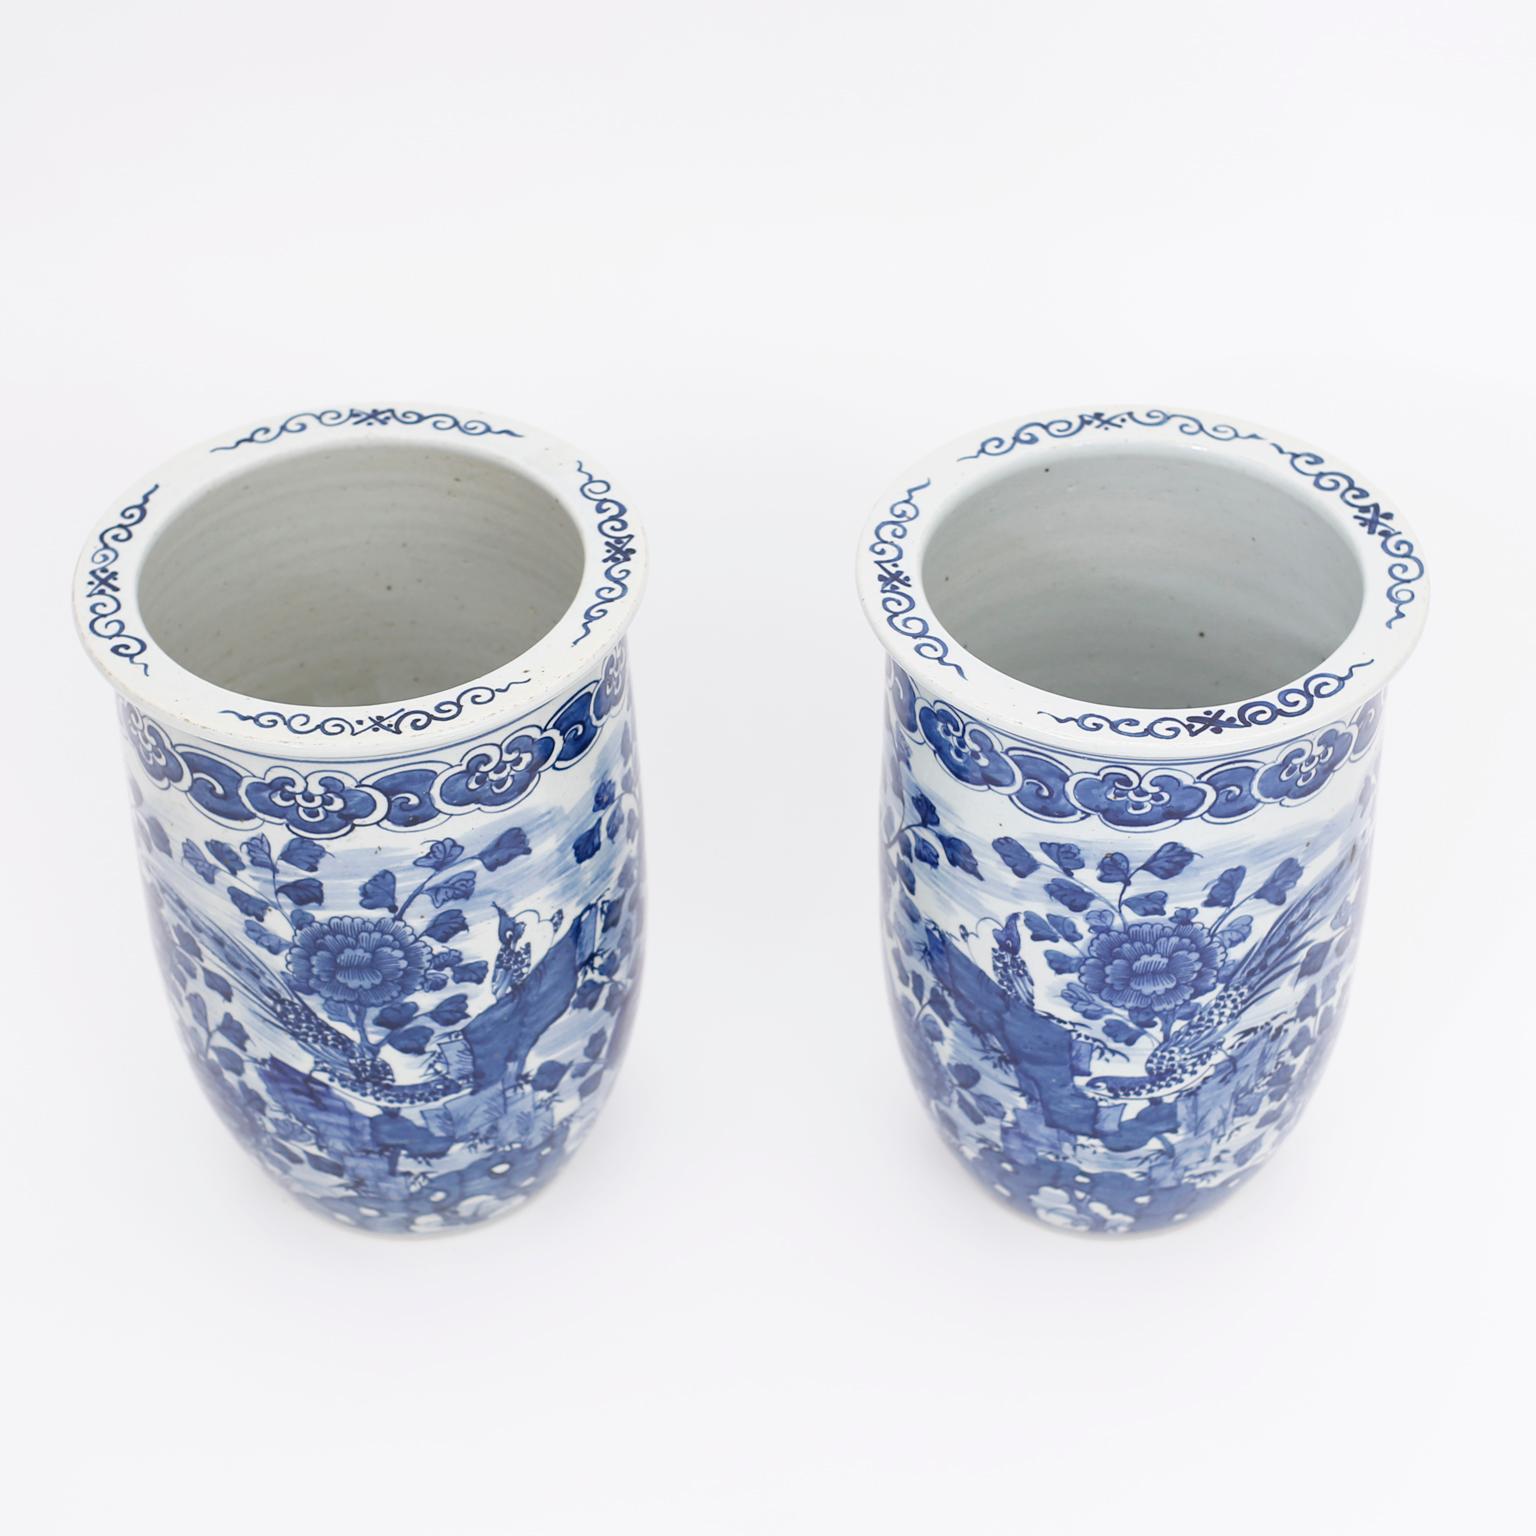 Pair of Chinese blue and white porcelain vases with classic form, in the Chinese Export manner and hand decorated all around with flowers and birds.